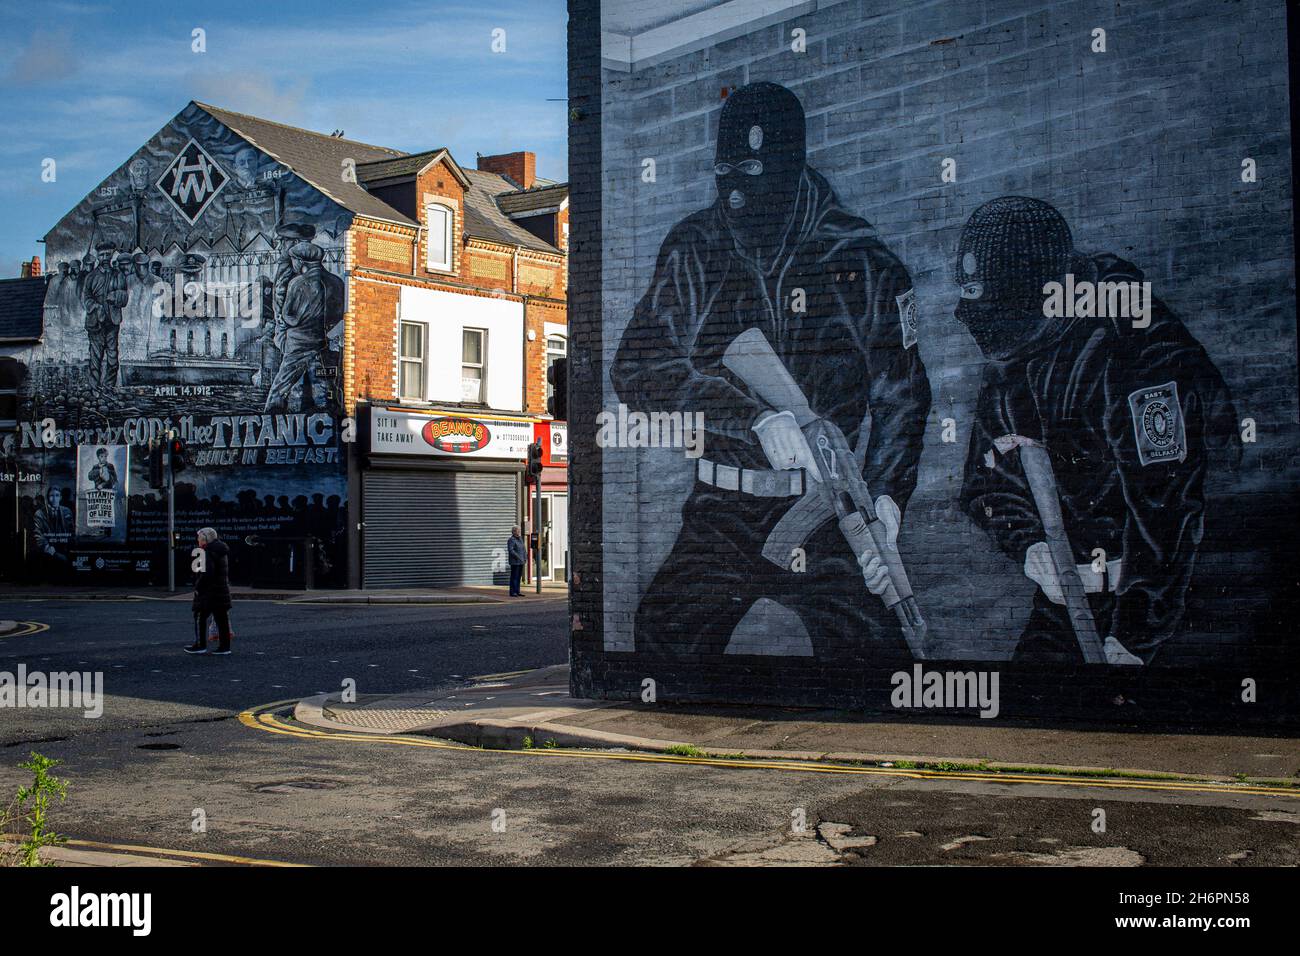 People  walking past a Loyalist paramilitary mural with masked men holding machine guns on the Newtownards road in Belfast,Northern Ireland. Stock Photo